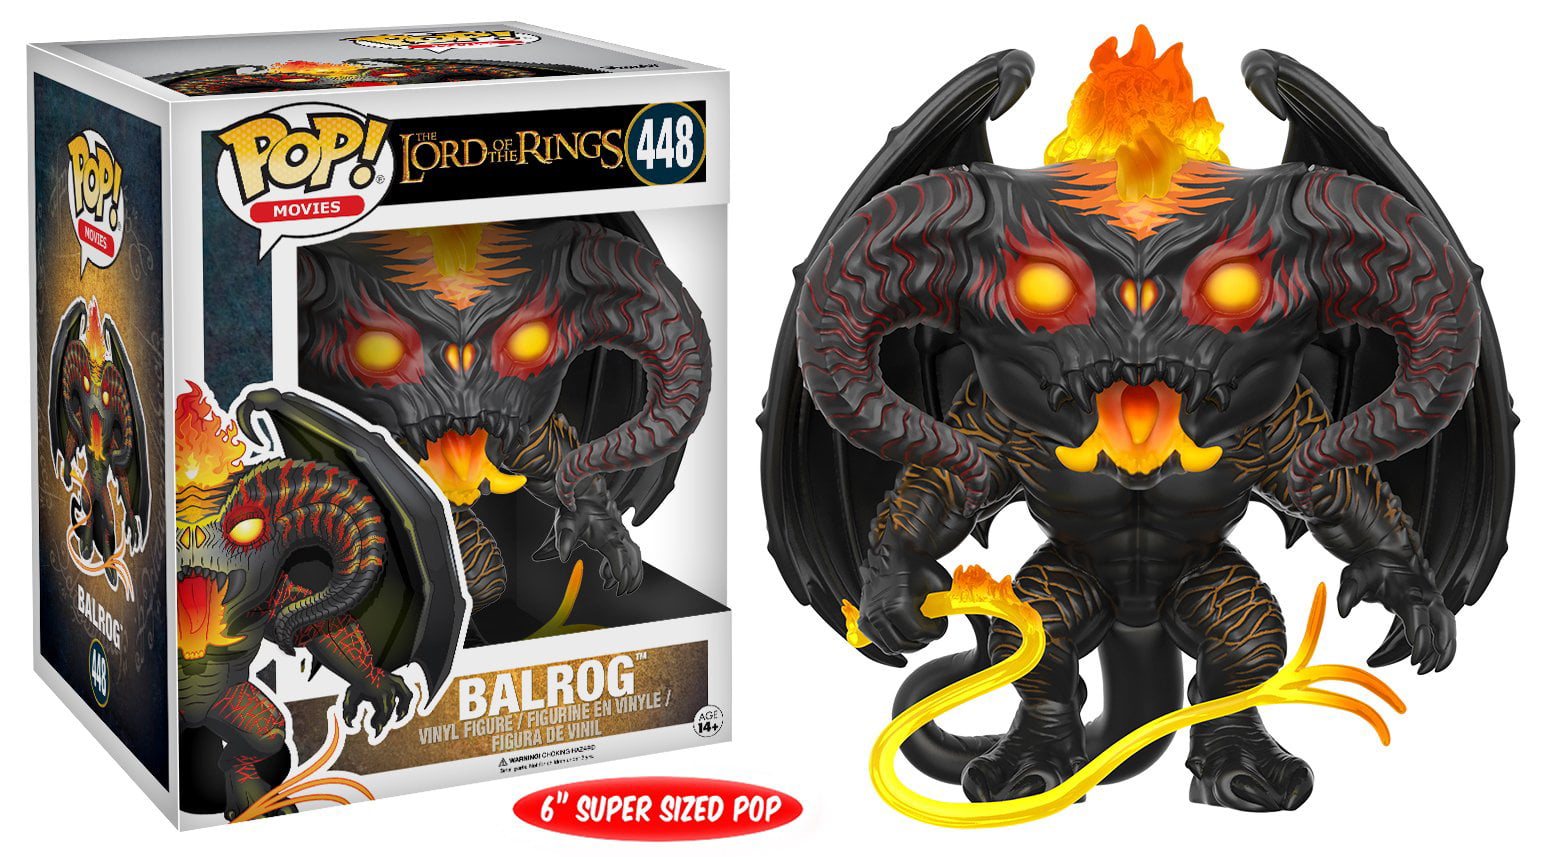 Vinyl Figure NEW Funko Balrog 6" Pop The Lord of the Rings 